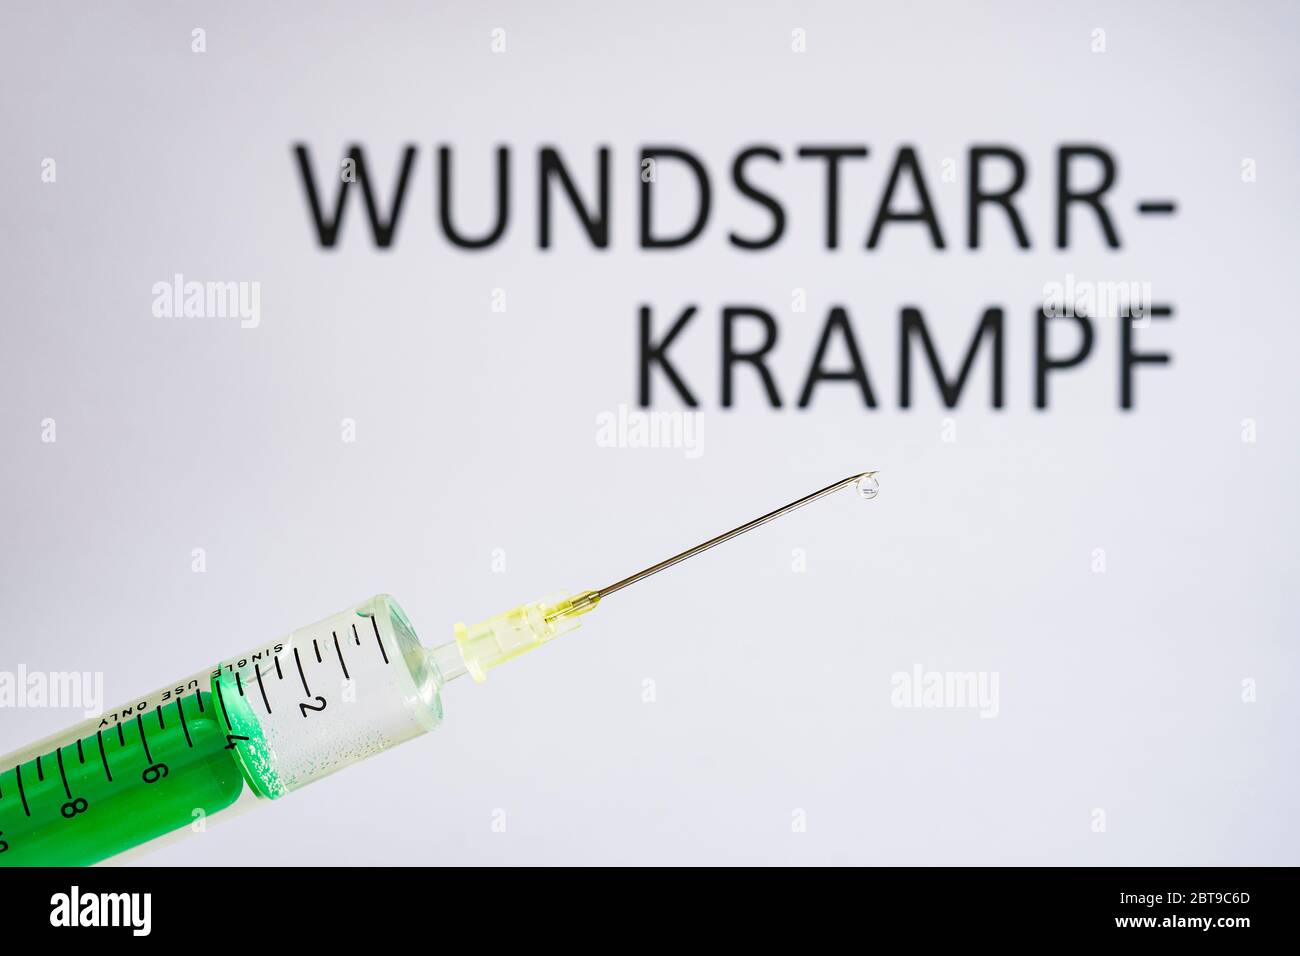 This photo illustration shows a disposable syringe with hypodermic needle, WUNDSTARRKRAMPF written on a white board behind Stock Photo